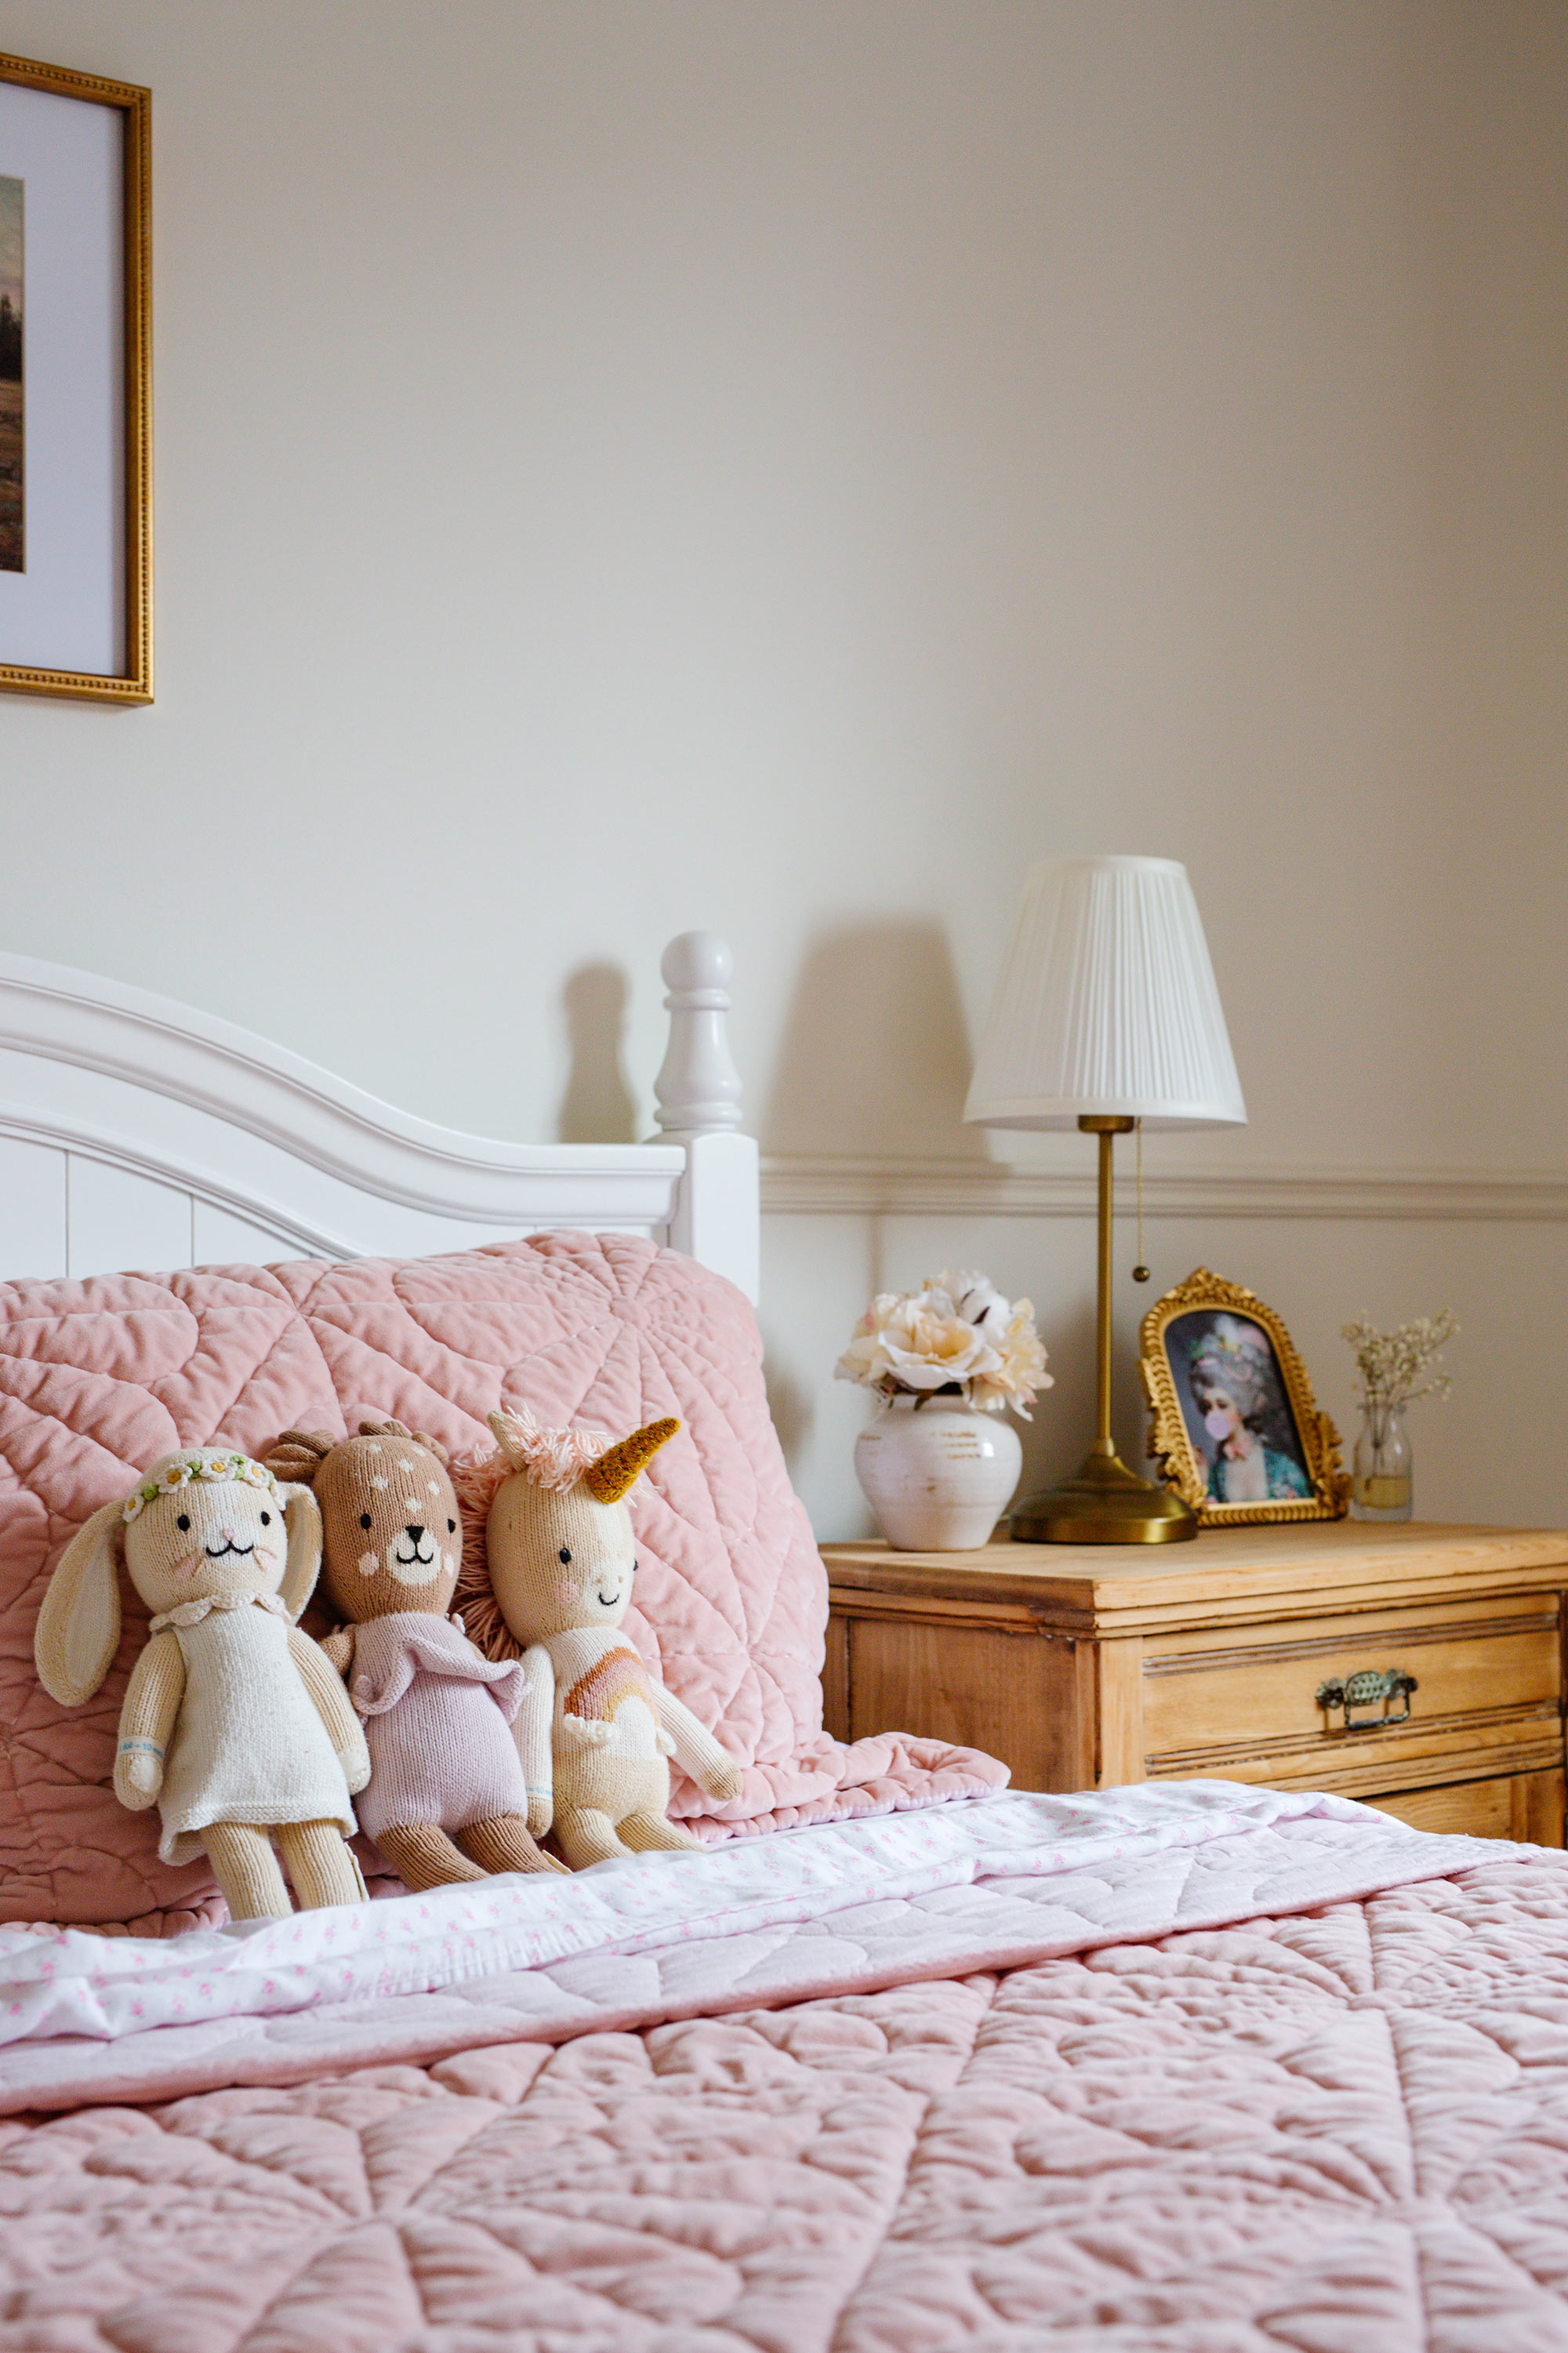 Kid-Friendly Room with Simple Bedding Options